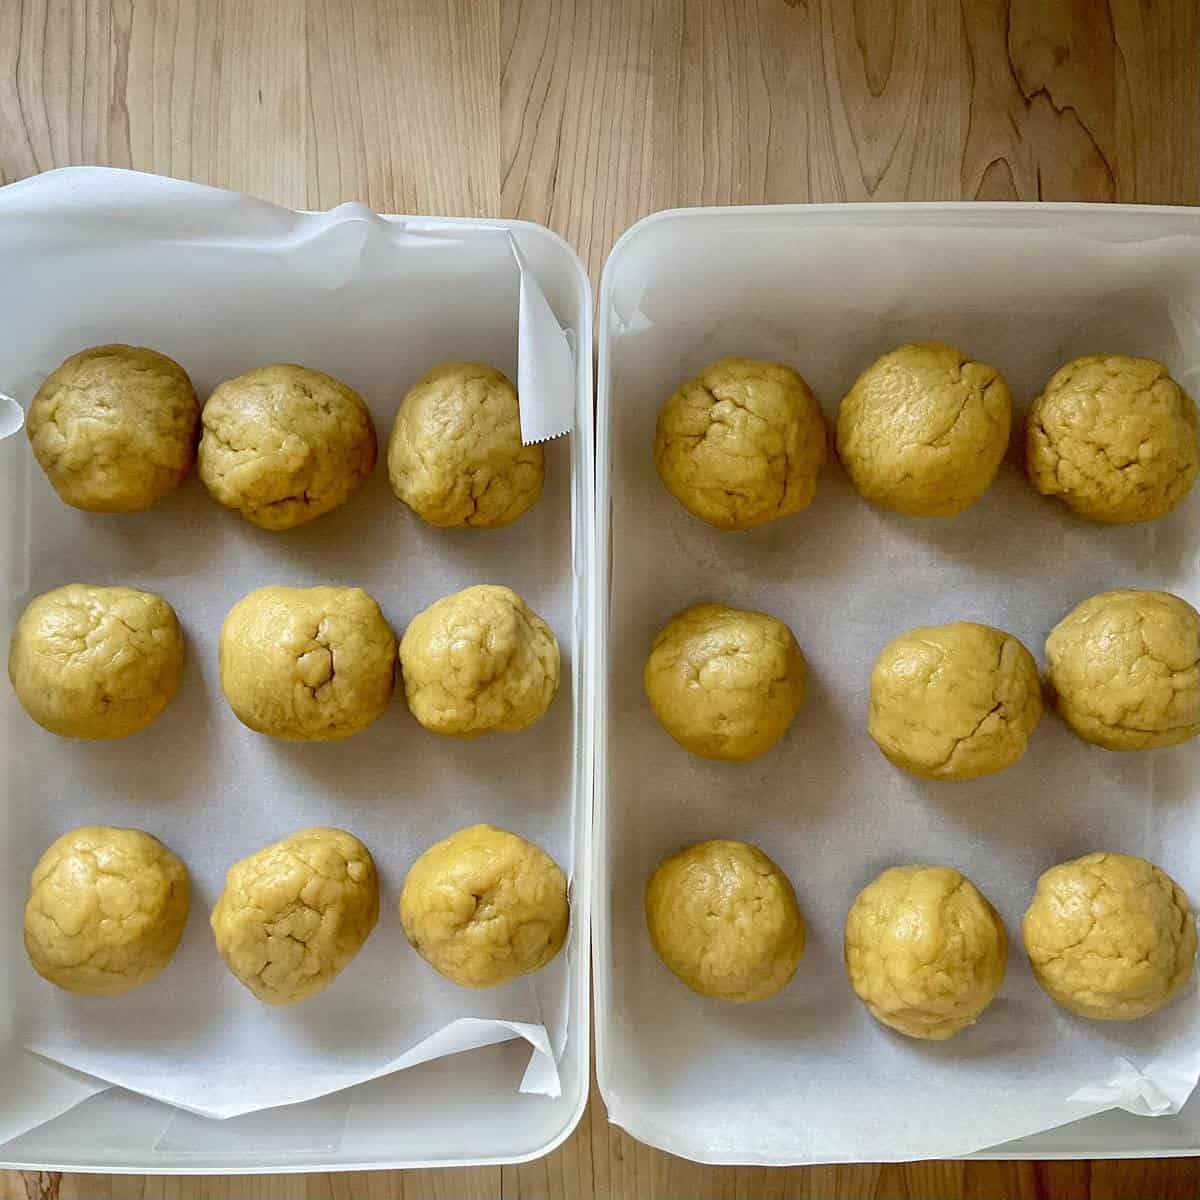 Balls of cookie dough in airtight containers.